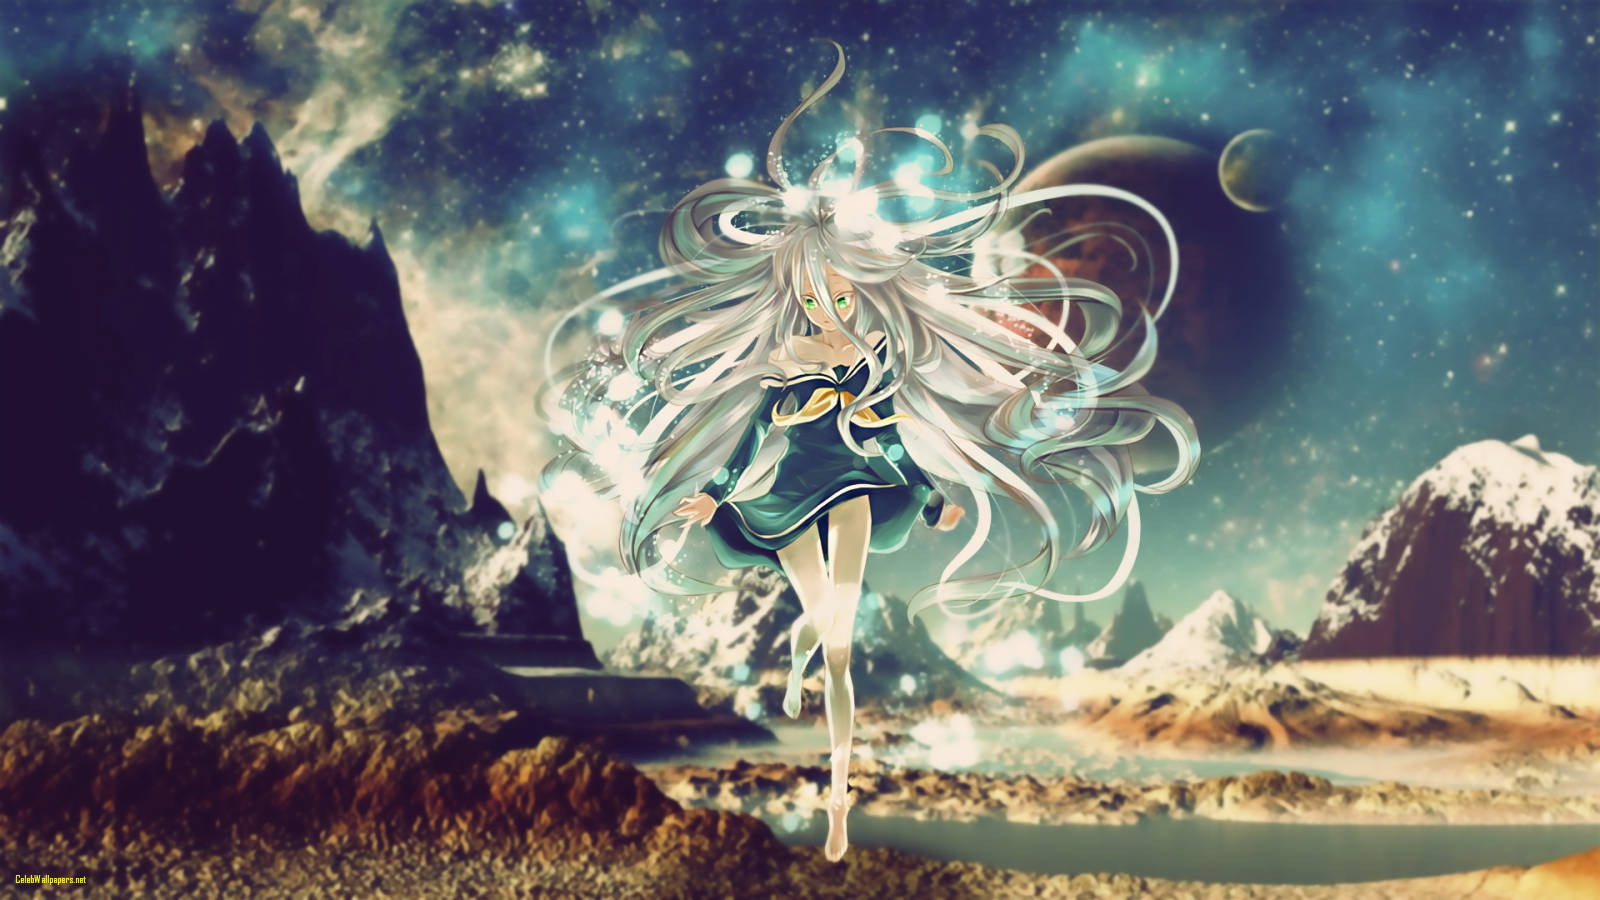 "Goddess Shiro, the lead character from No Game No Life" Wallpaper